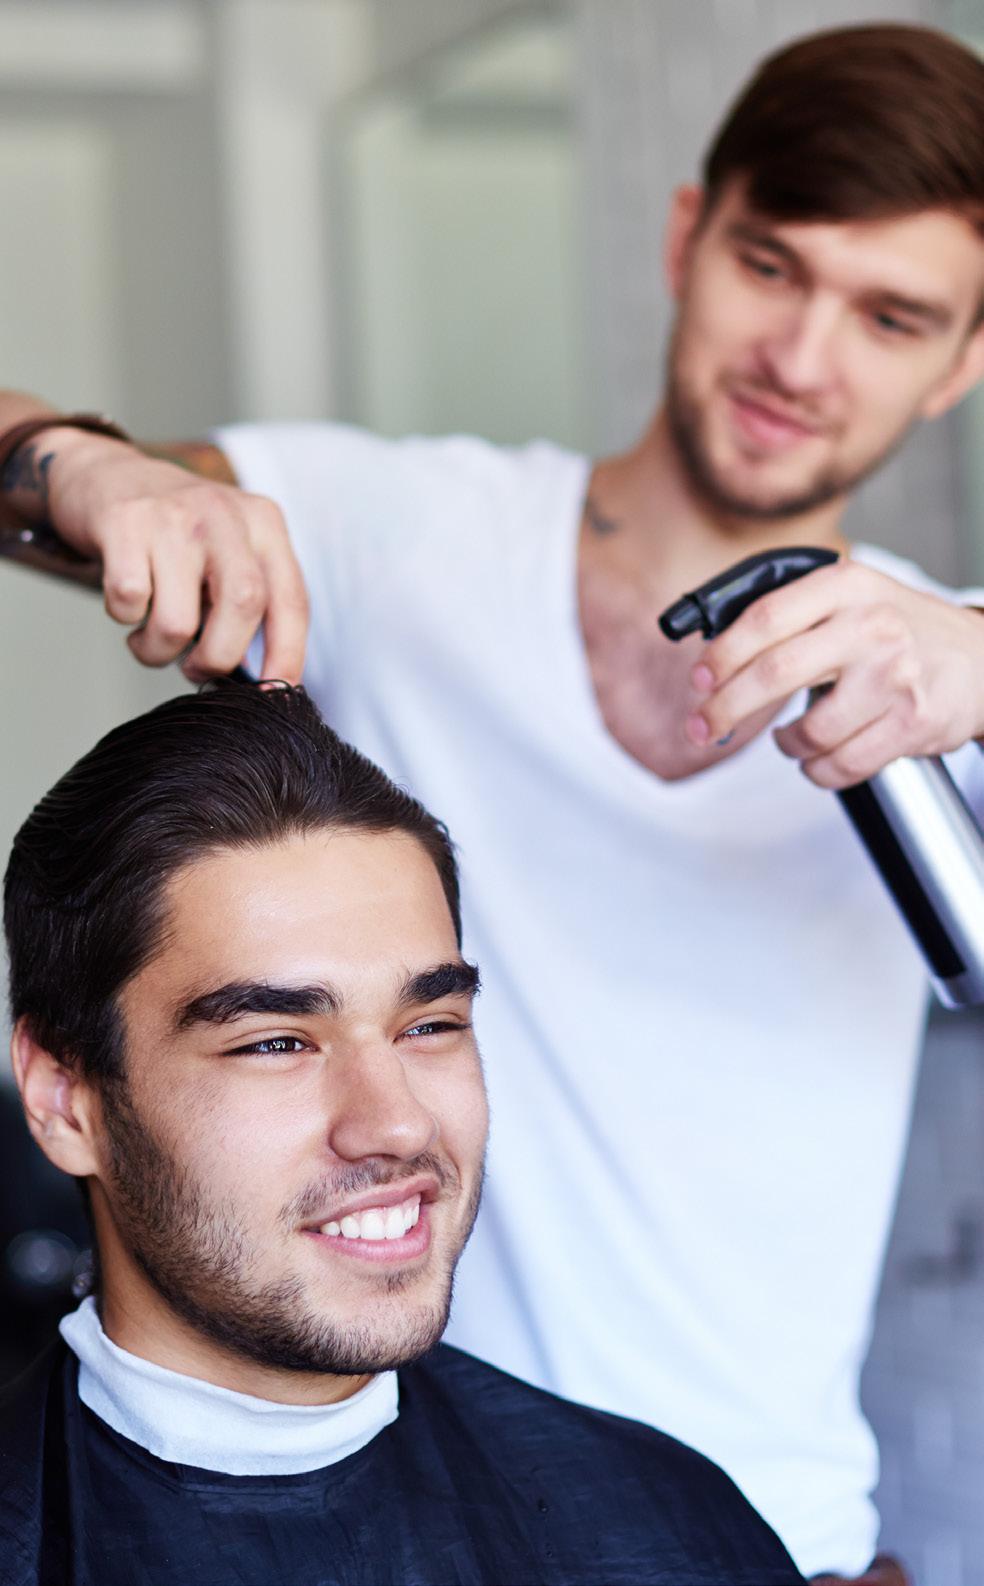 weltec.ac.nz/hairdressing 9 Barbering New Zealand Certificate in Barber Skills Level 3 March 2018 1 year, full-time Wellington TE AUAHA Gain the basic skills to begin working in barbering.